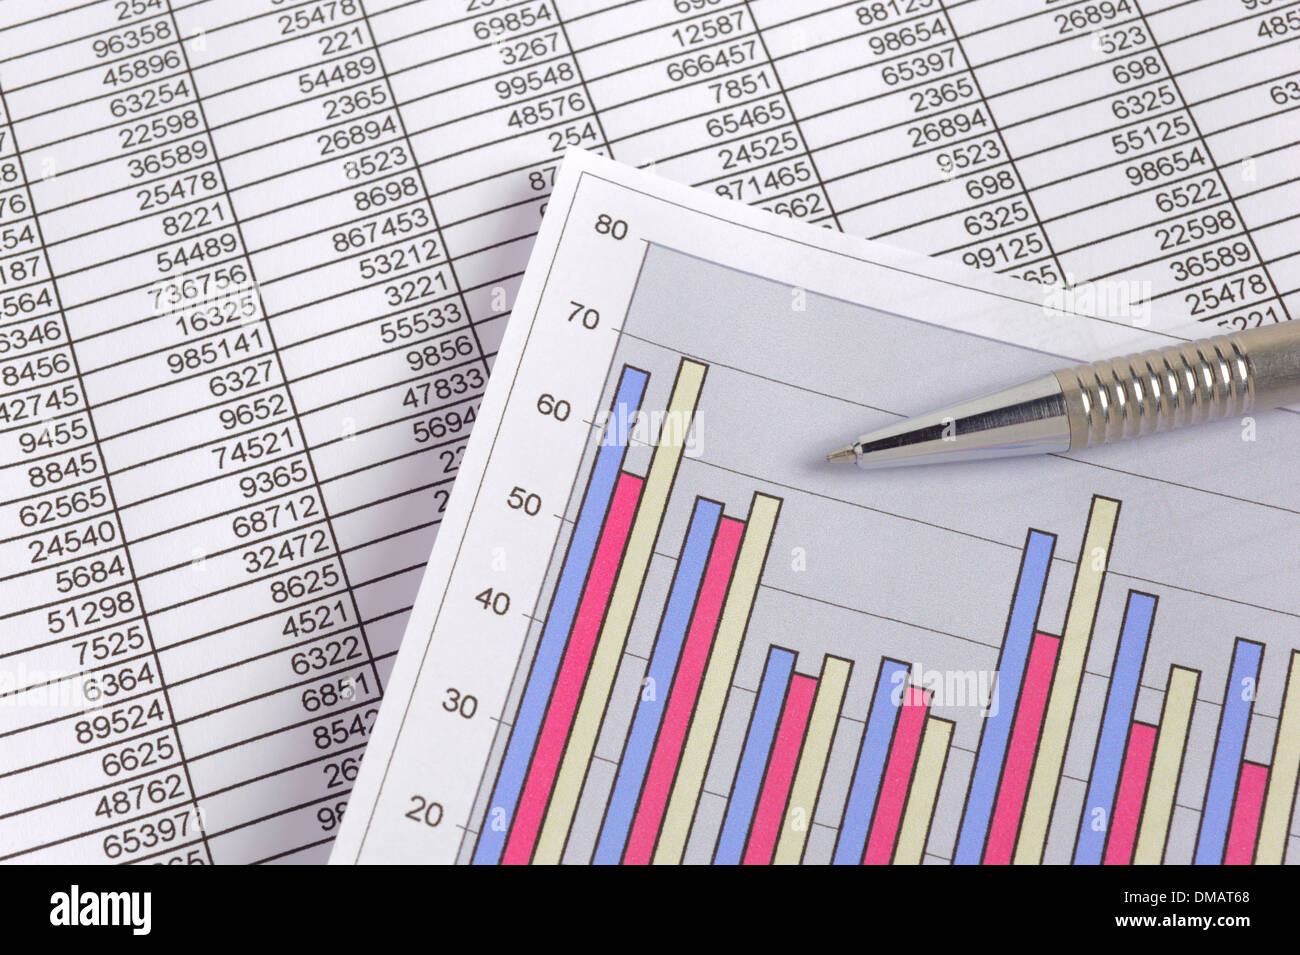 business finance chart with data and pen Stock Photo